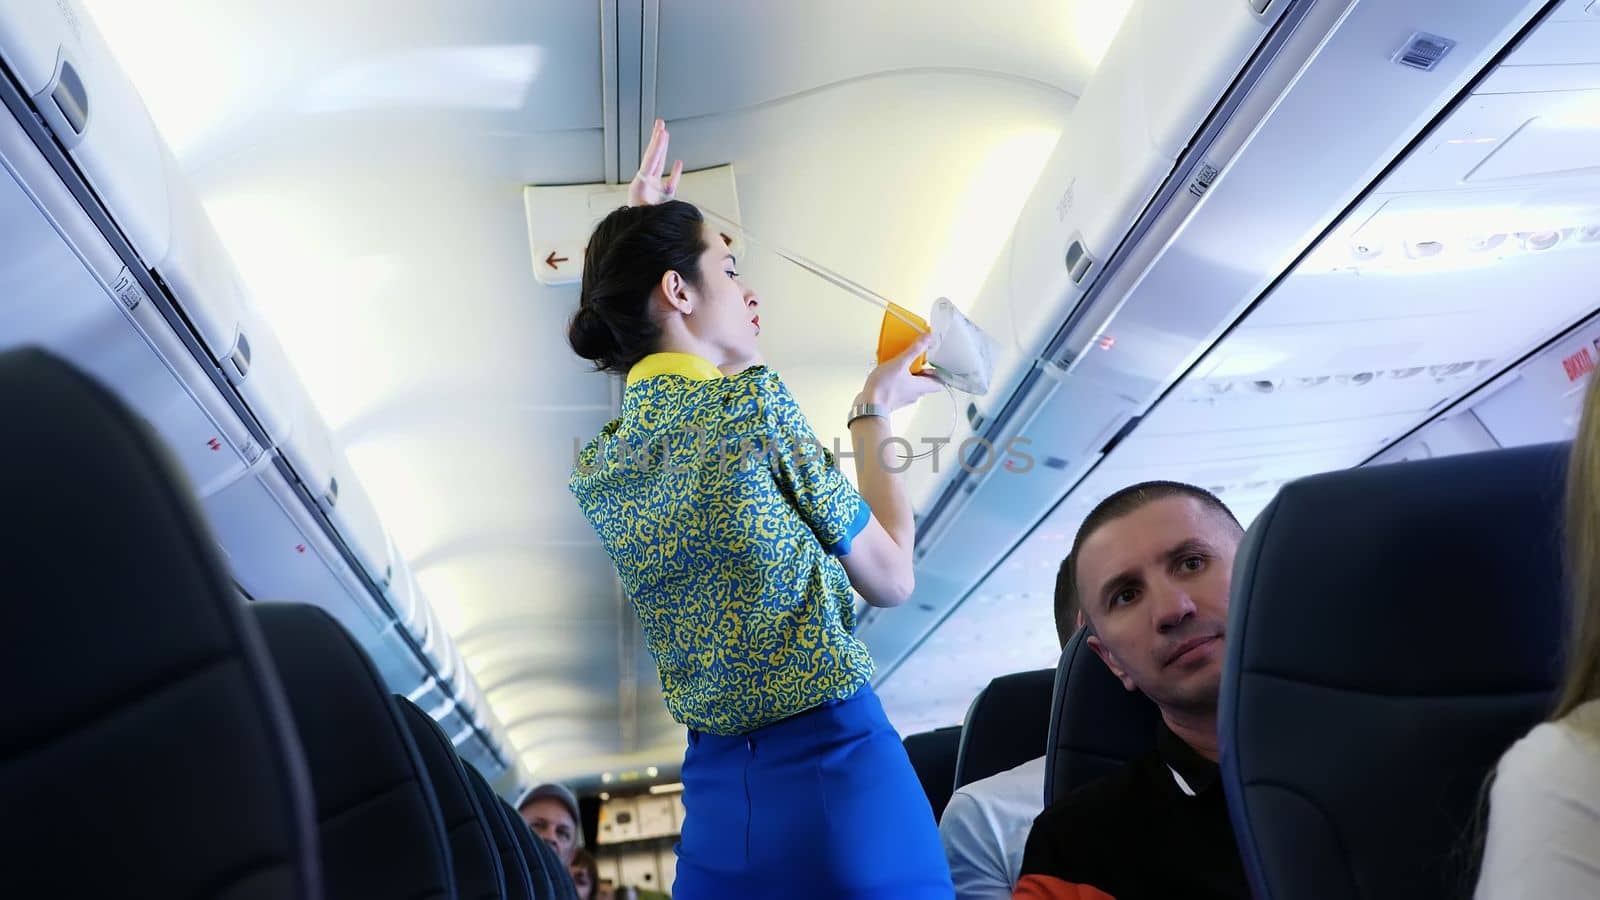 AIRPORT BORYSPIL, UKRAINE - OCTOBER 24, 2018: Ukraine International Airlines. Flight attendant, stewardess gives preflight instructions, during Pre-flight safety demonstration. Interior of airplane with passengers on seats. High quality photo